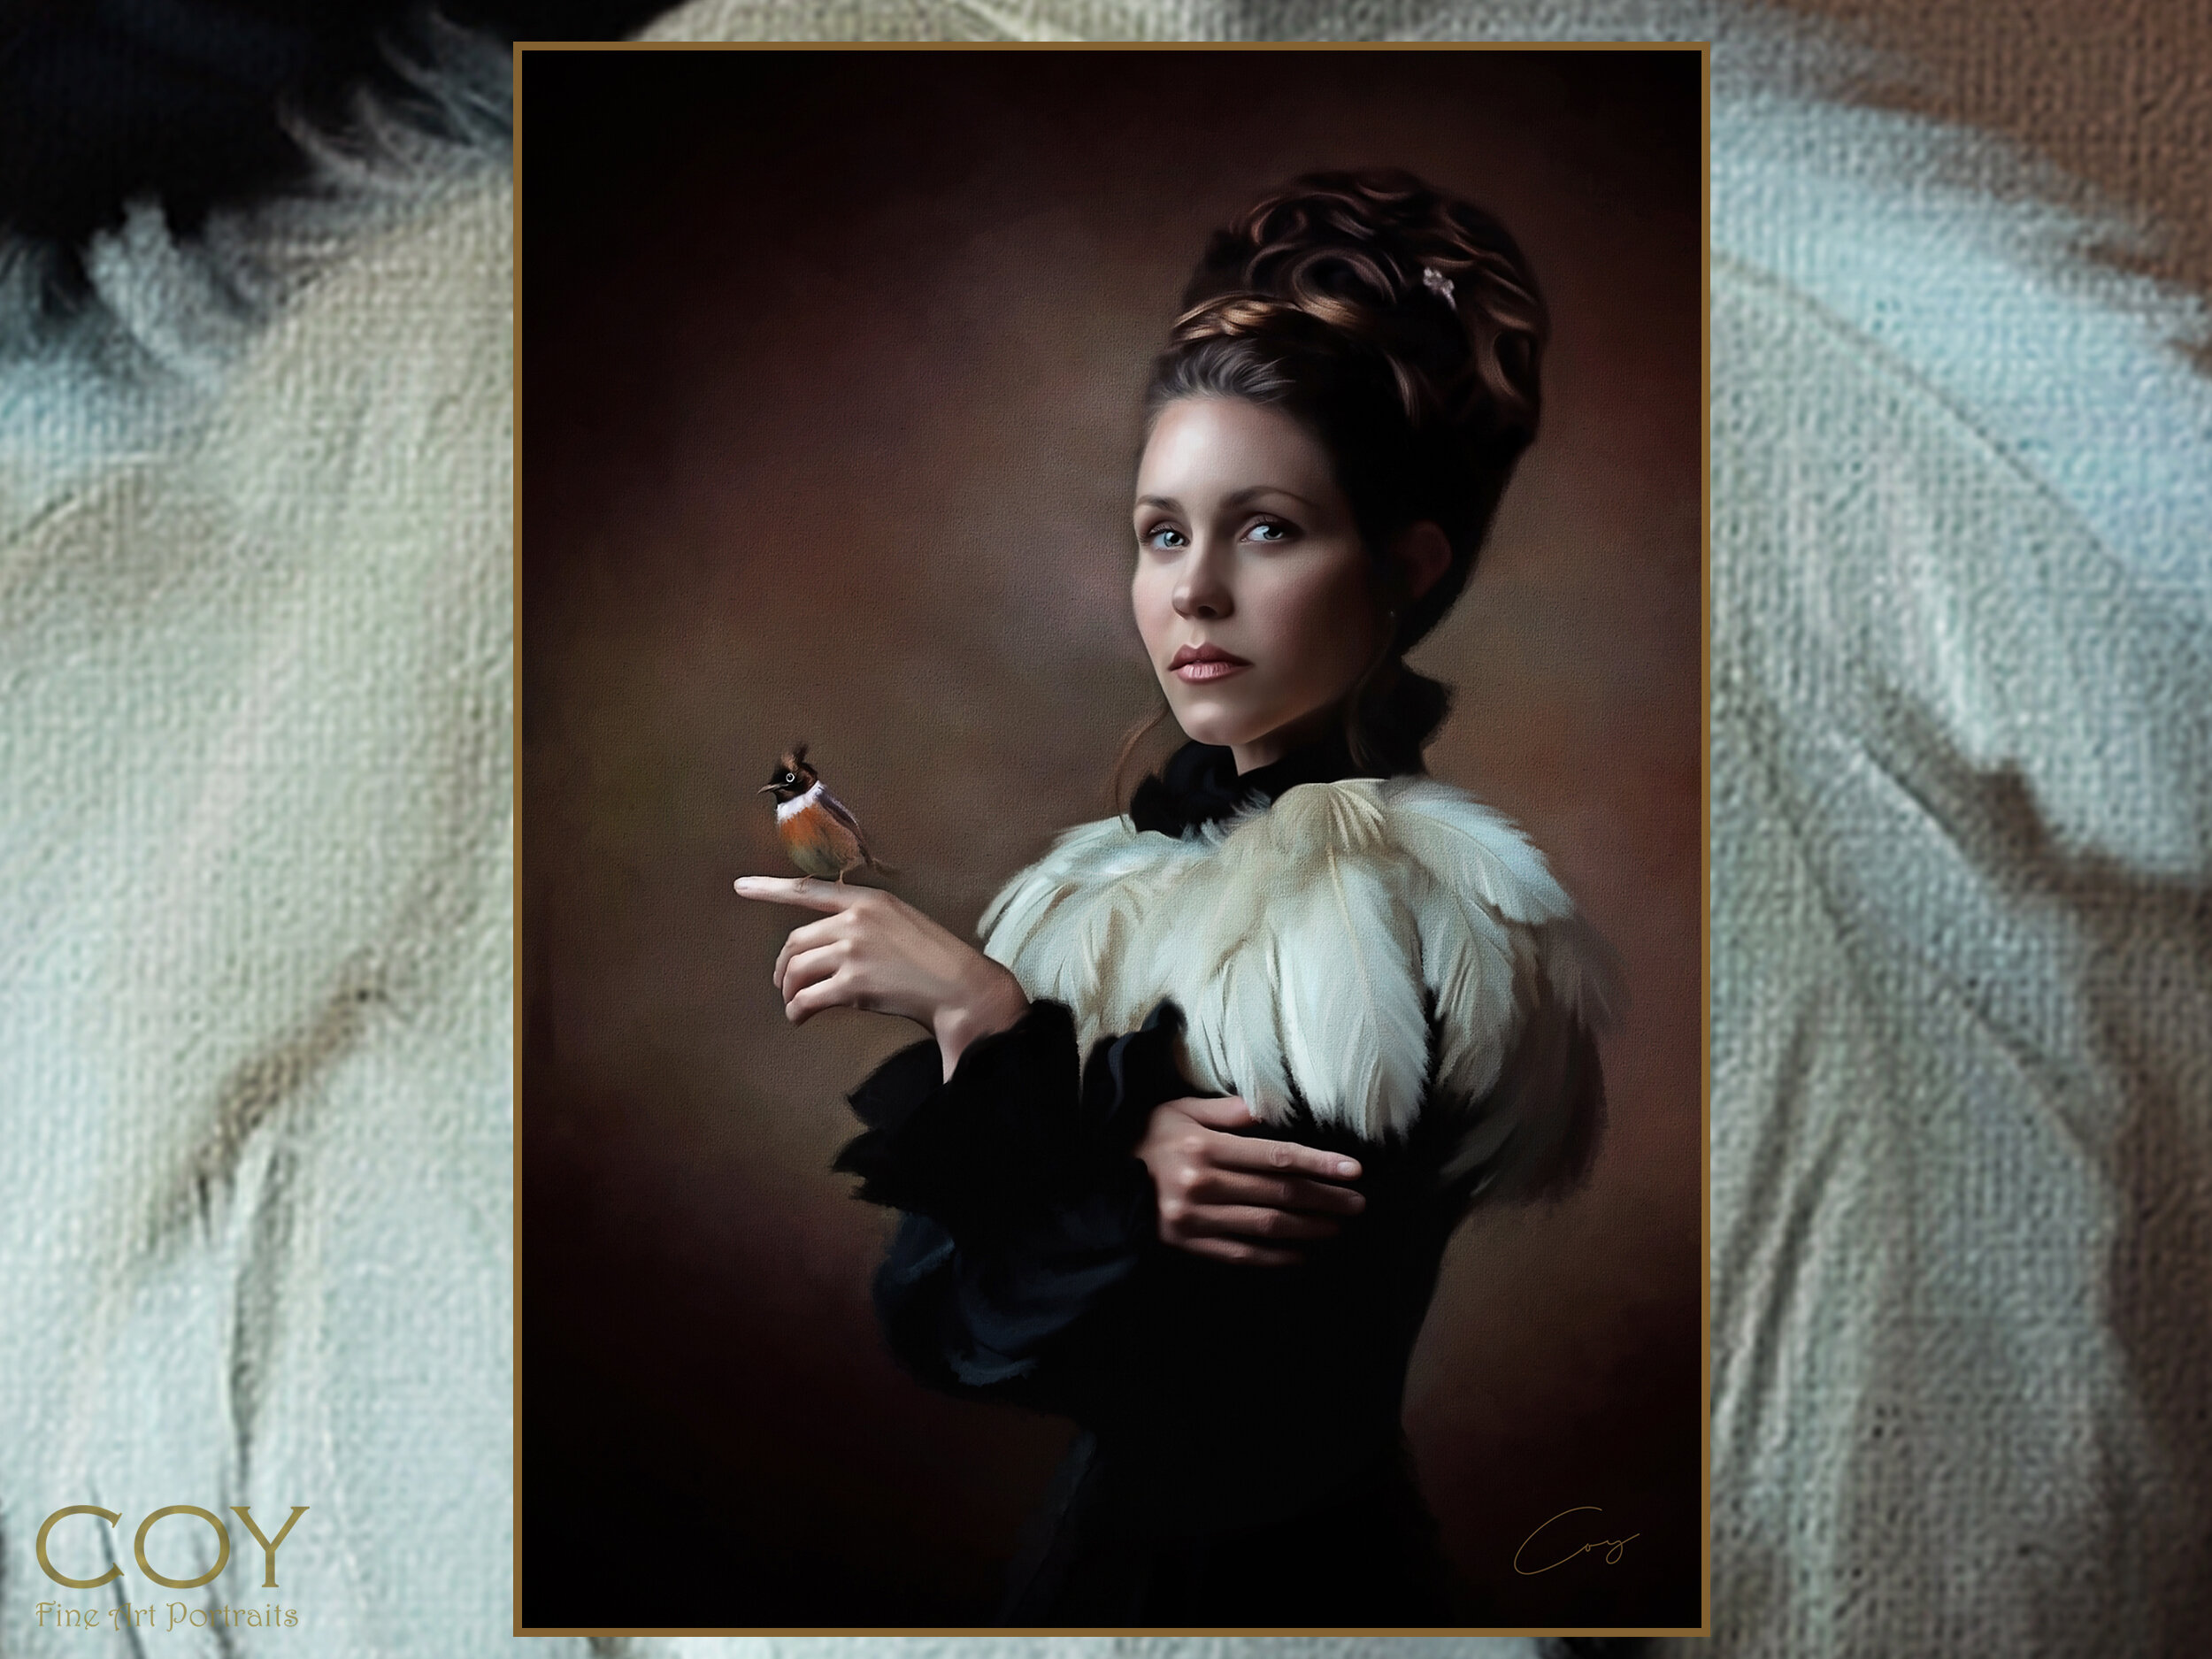 family-pet-painting-san diego-rancho santa fe-temecula-laguna-rembrandt-couture-feathers-girls-inspired dance-del rayo village shopping center-la jolla.jpg